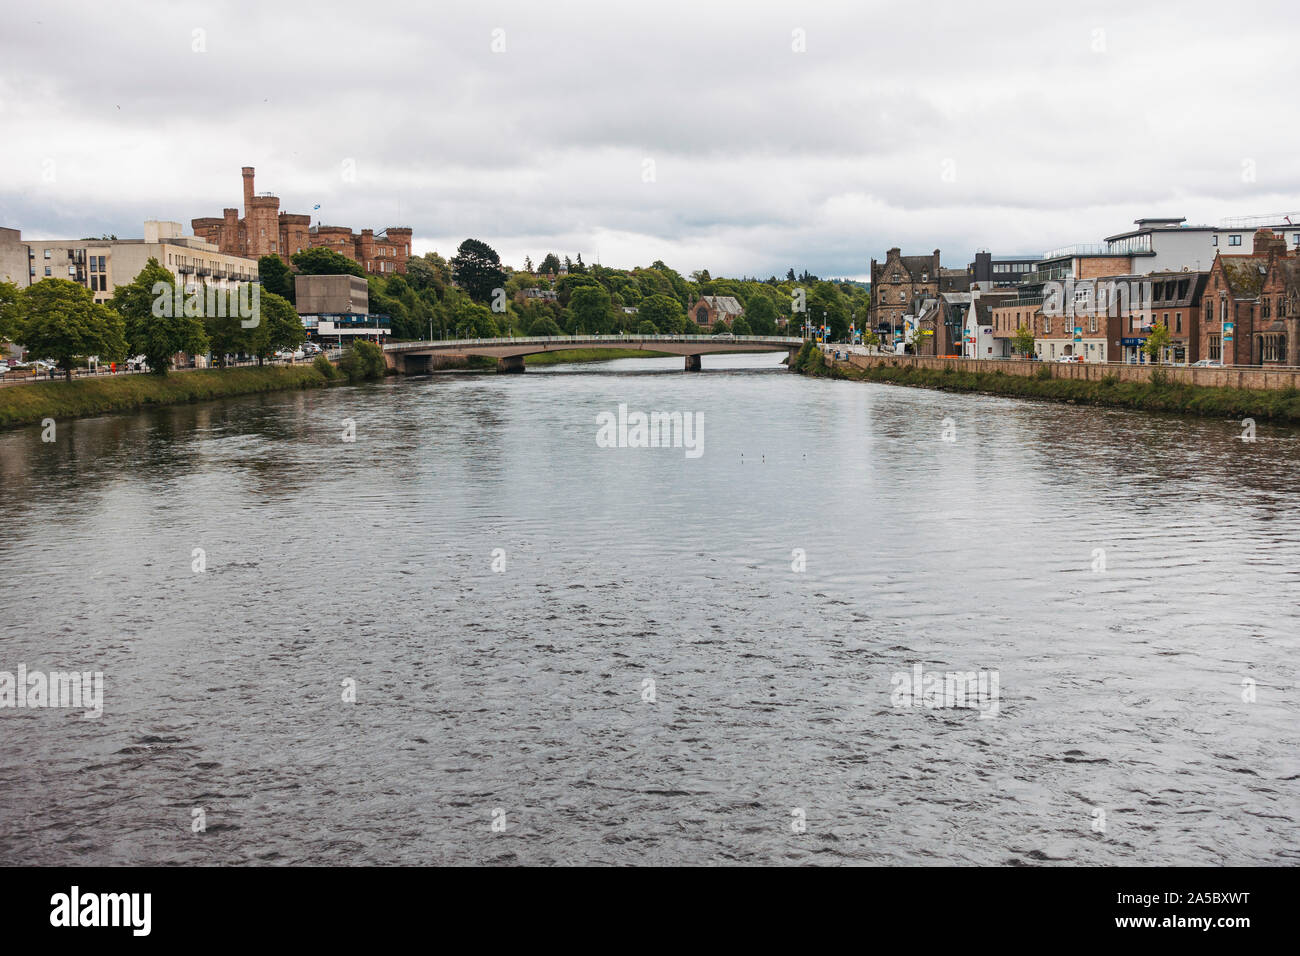 Inverness Castle, on the banks of the River Ness, Scotland, United Kingdom Stock Photo